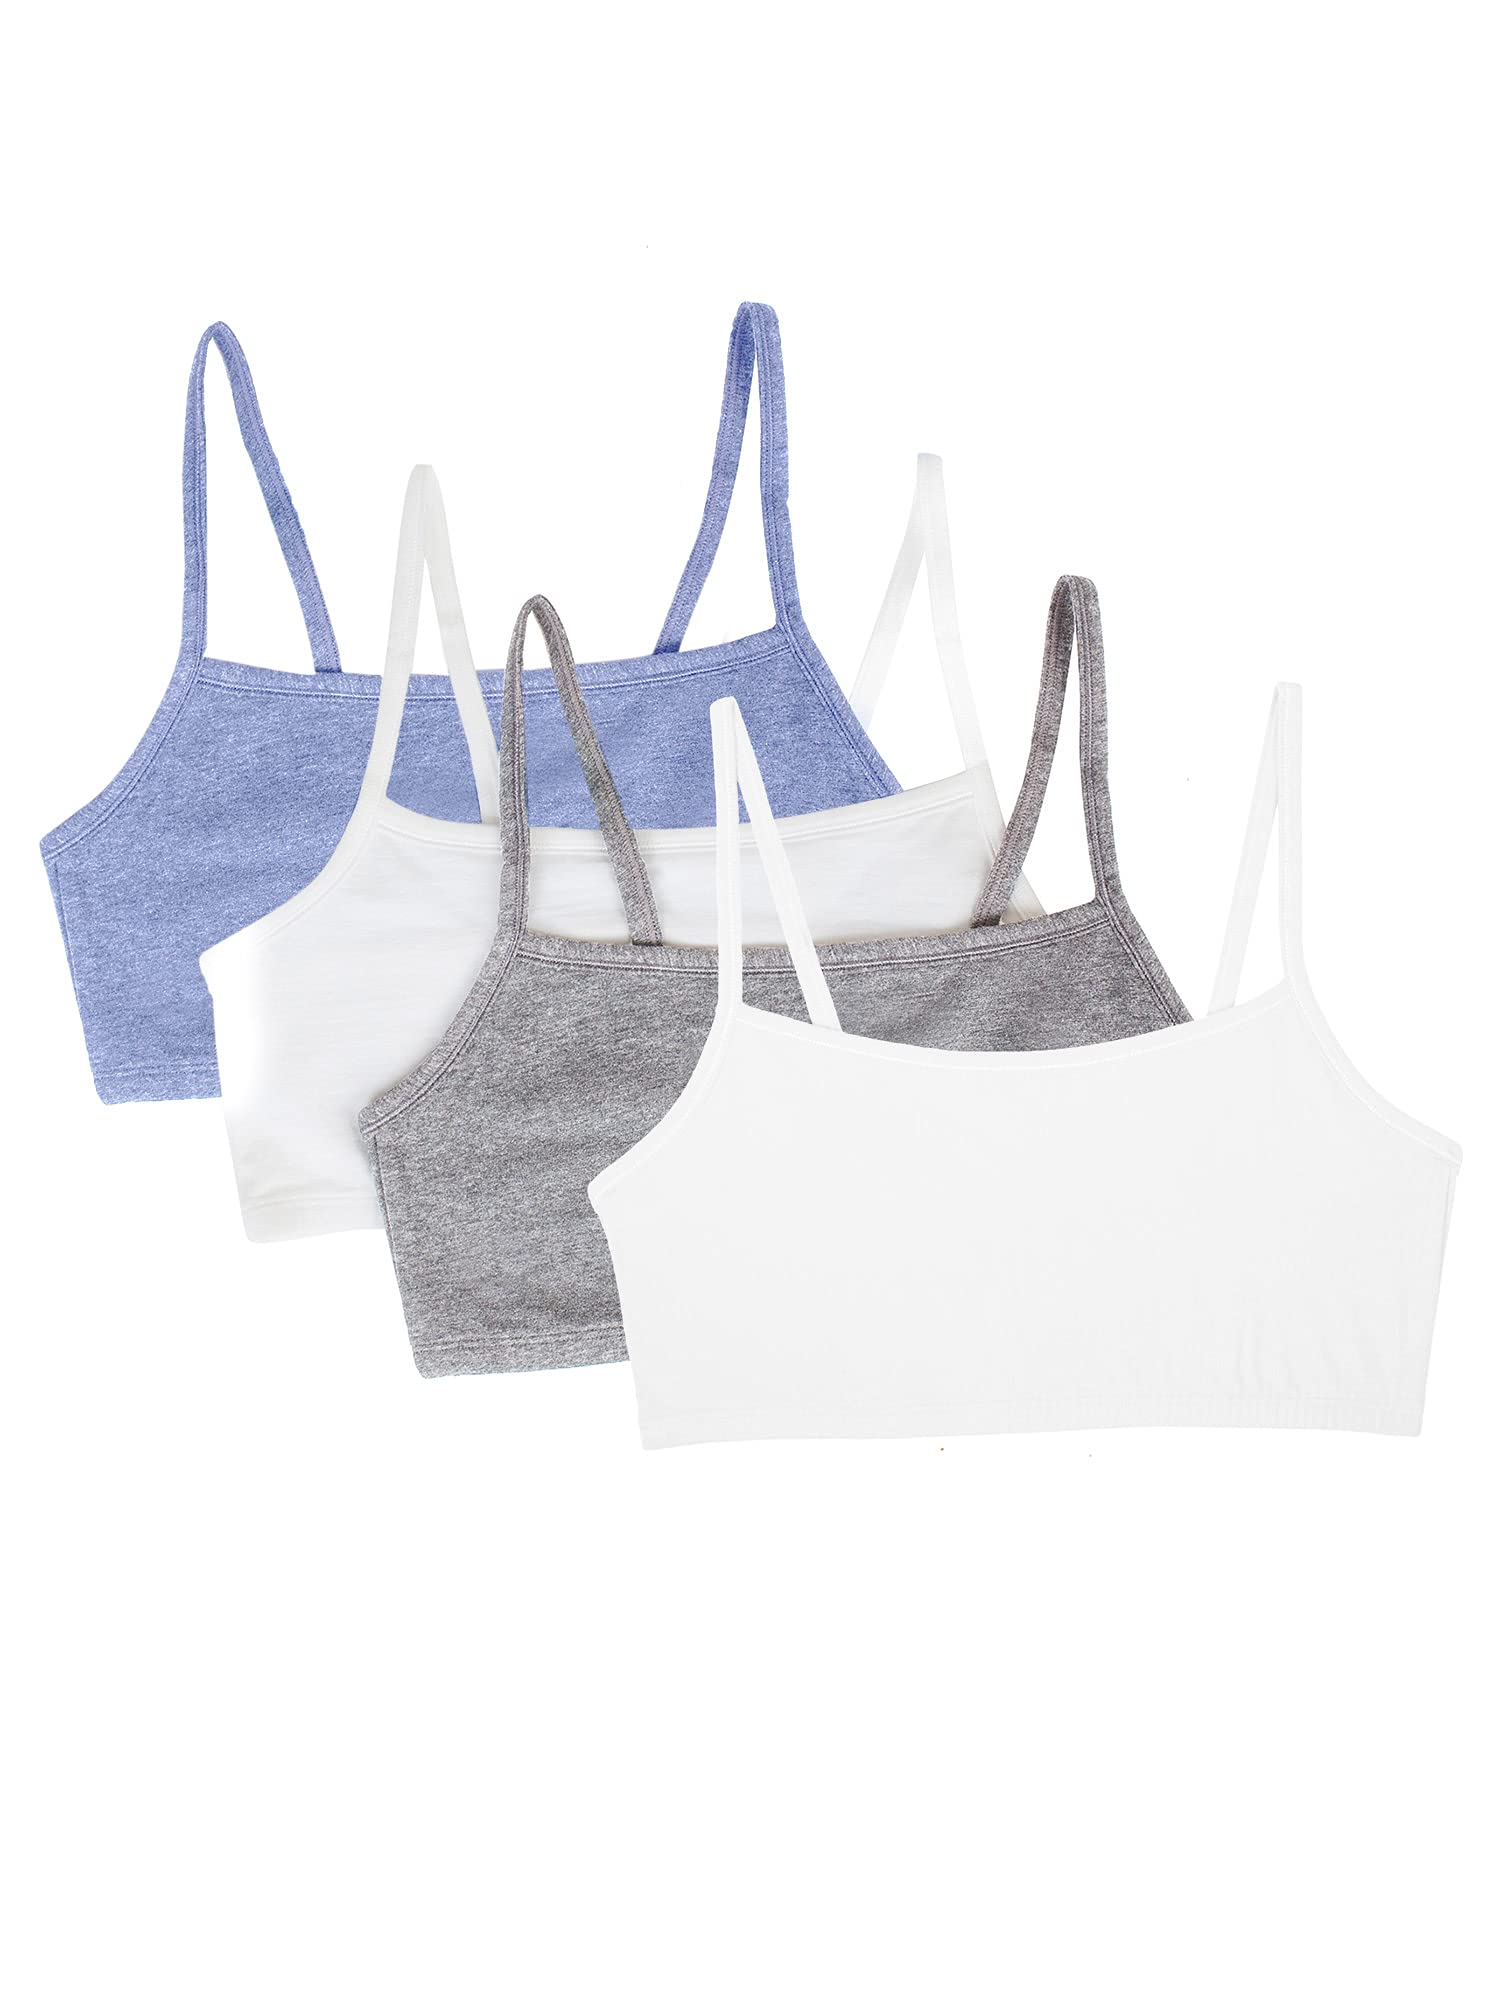 Fruit of the Loom womens Spaghetti Strap cotton Pullover Value Pack Sports Bra, Heather greyWhiteWhiteBlue Heather 4-pack, 36 US